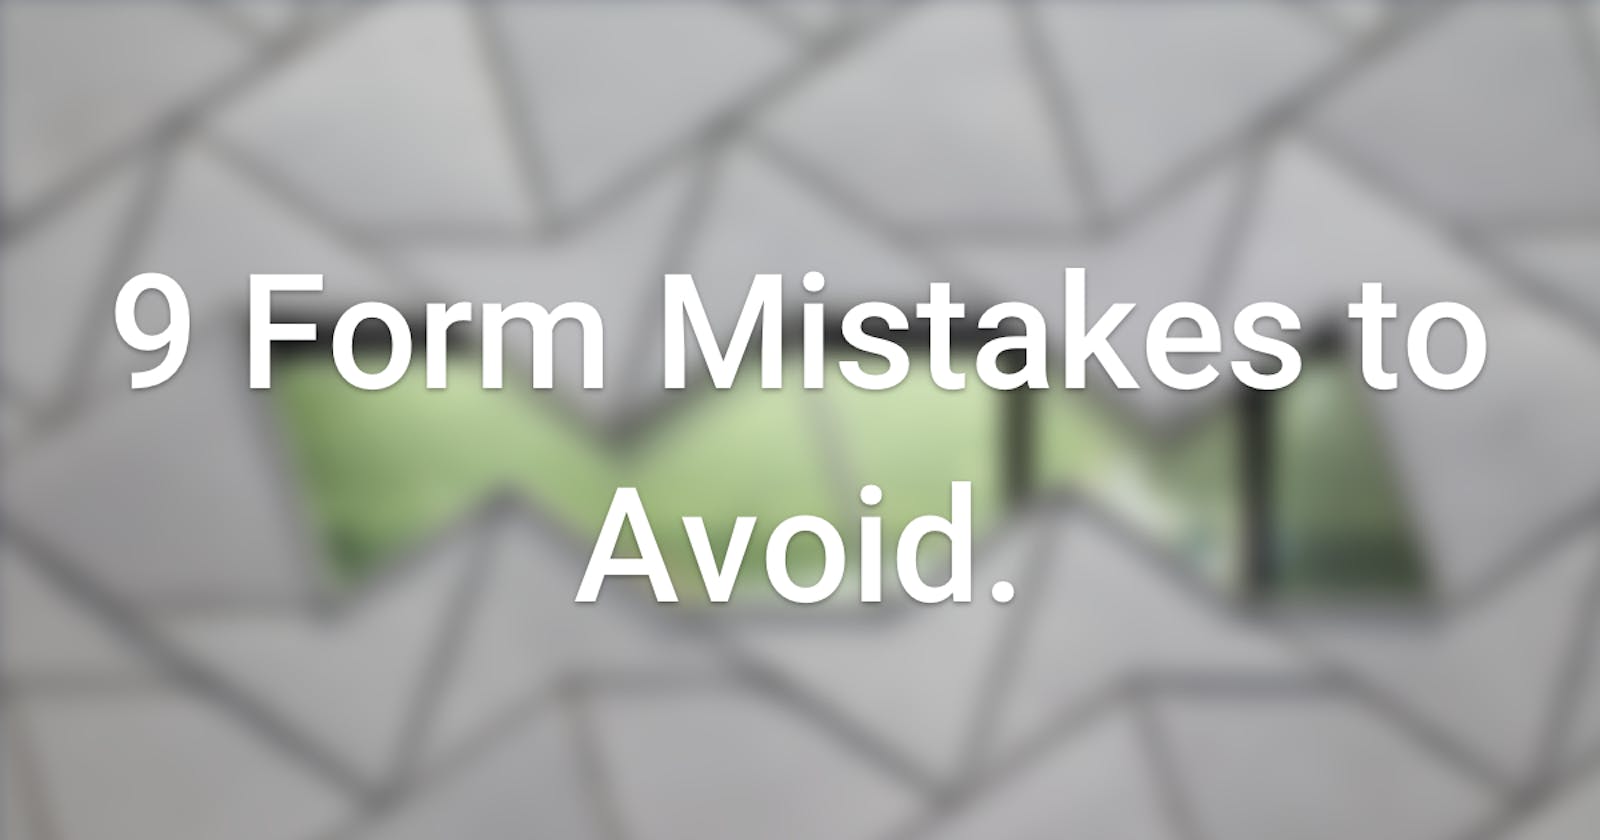 9 Form Mistakes to Avoid